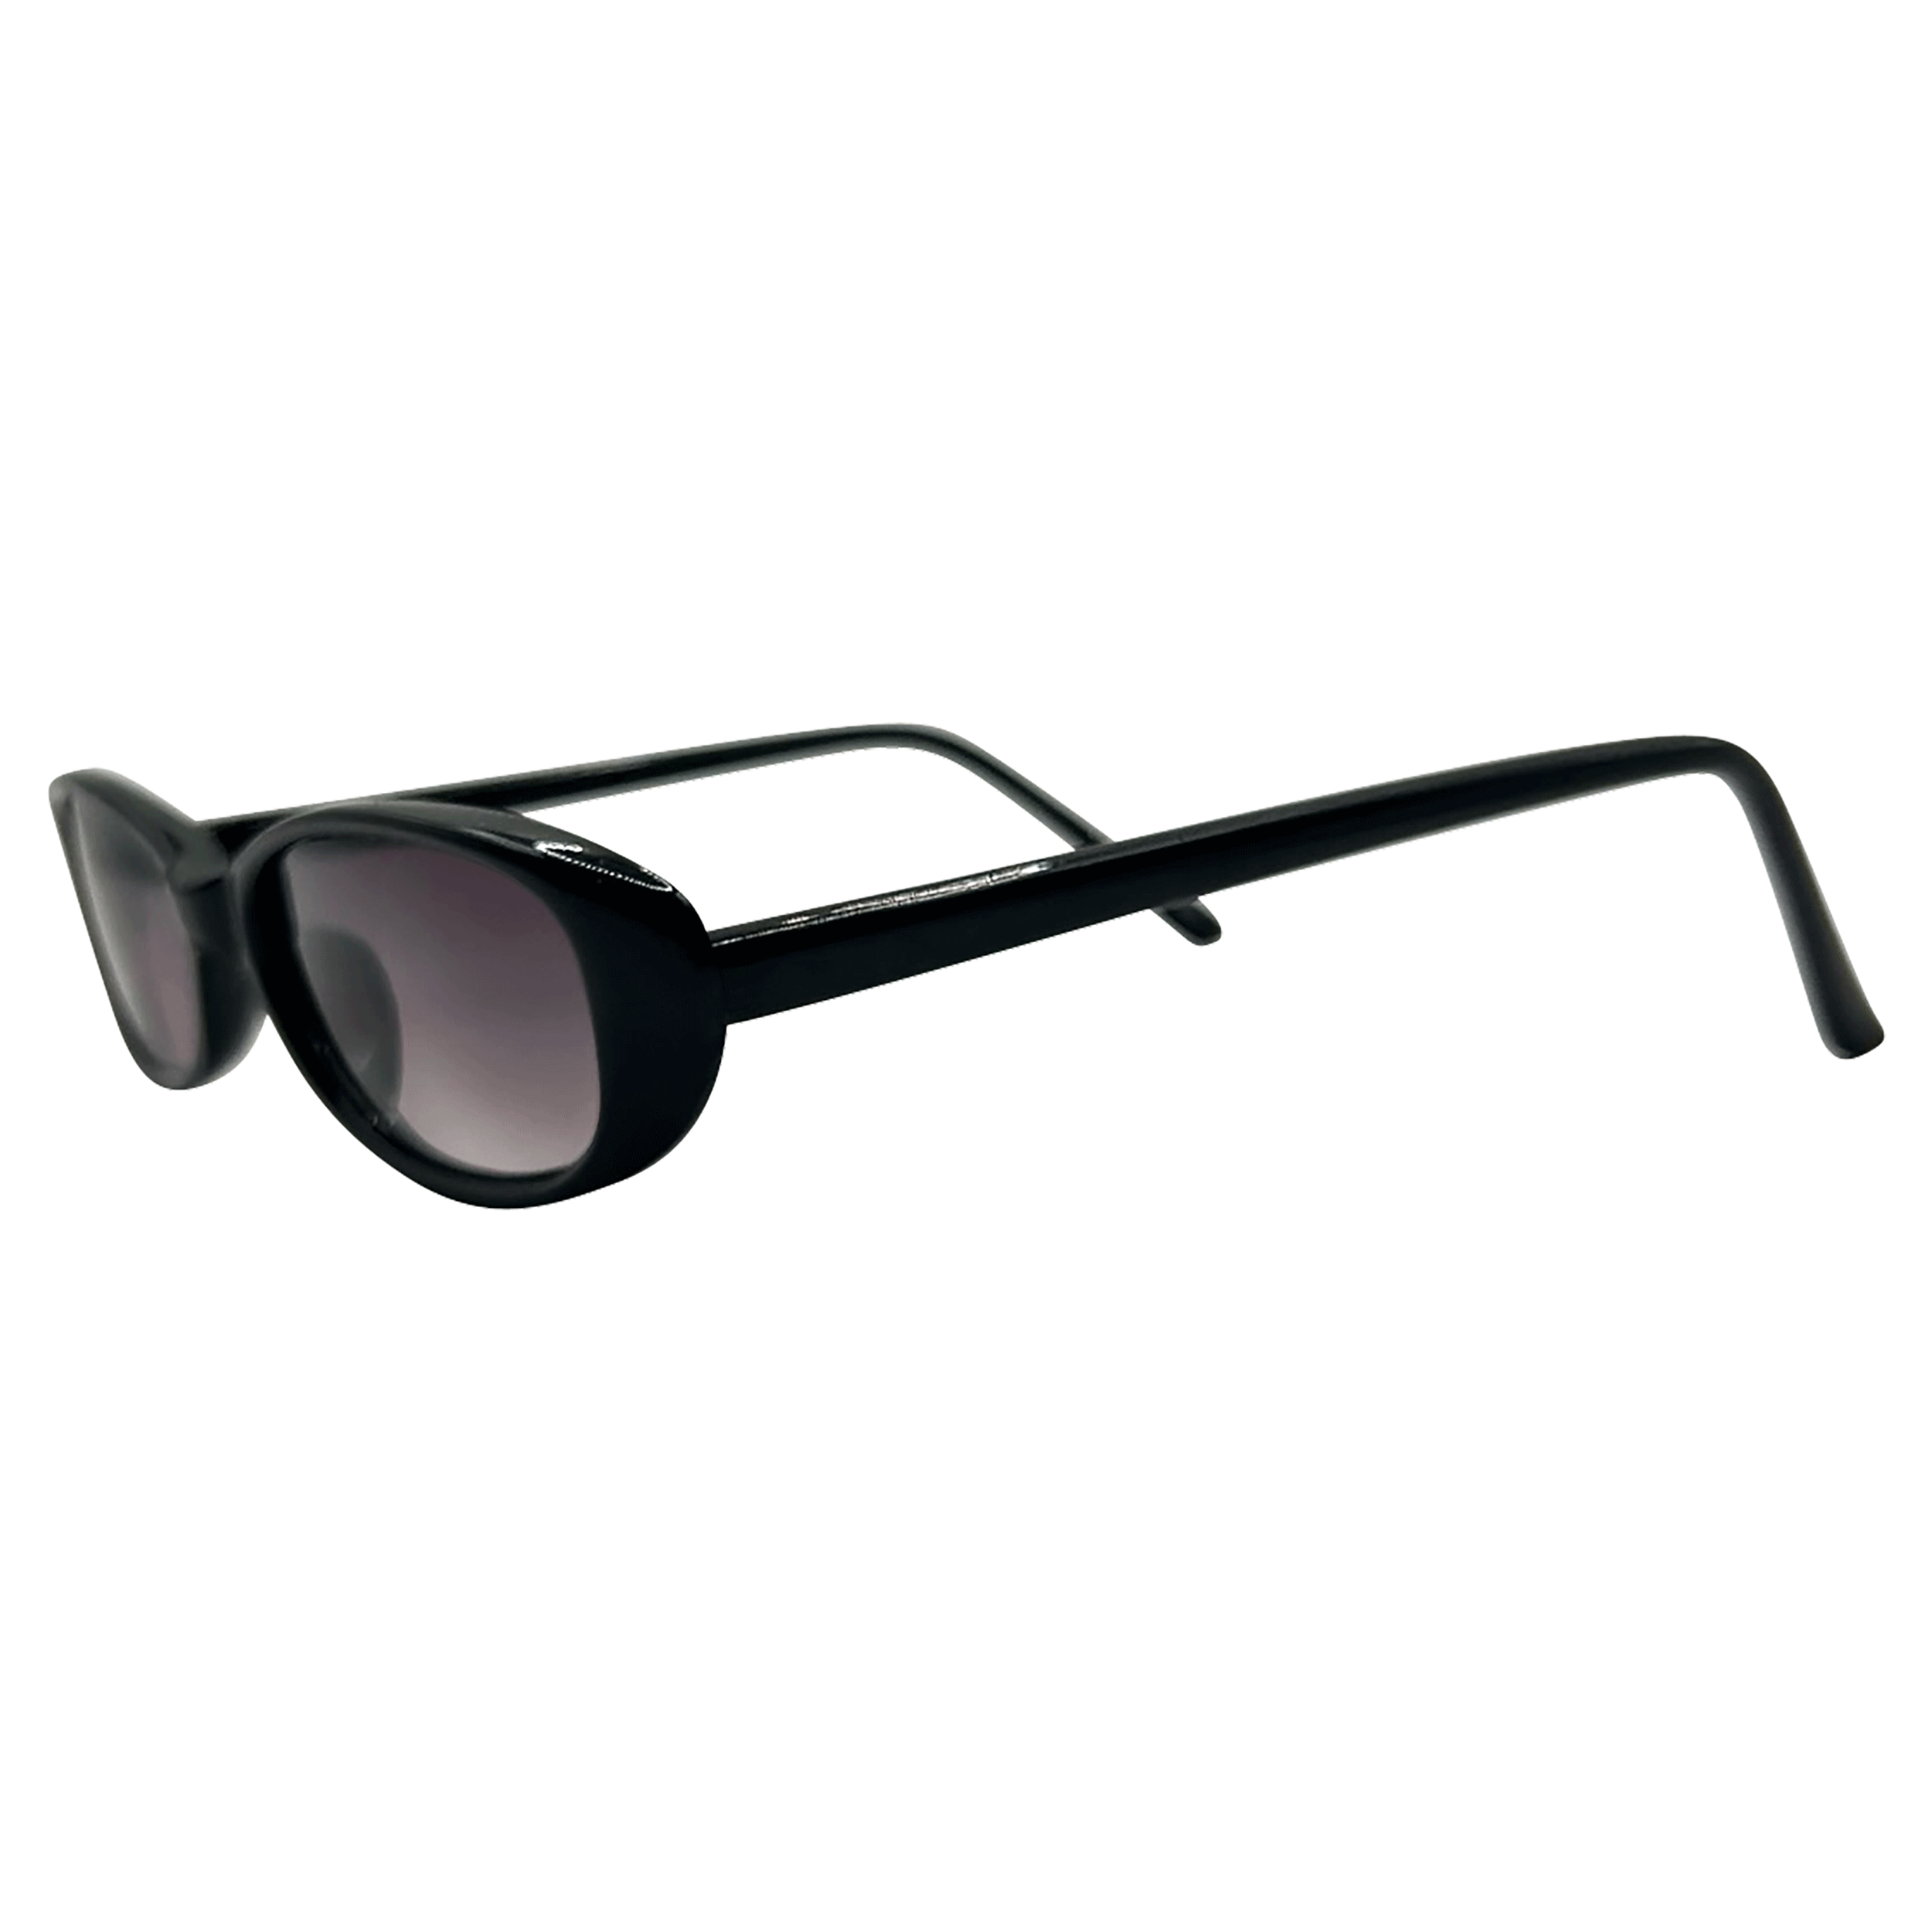 FIDDLE Indie Trending 90s Sunglasses